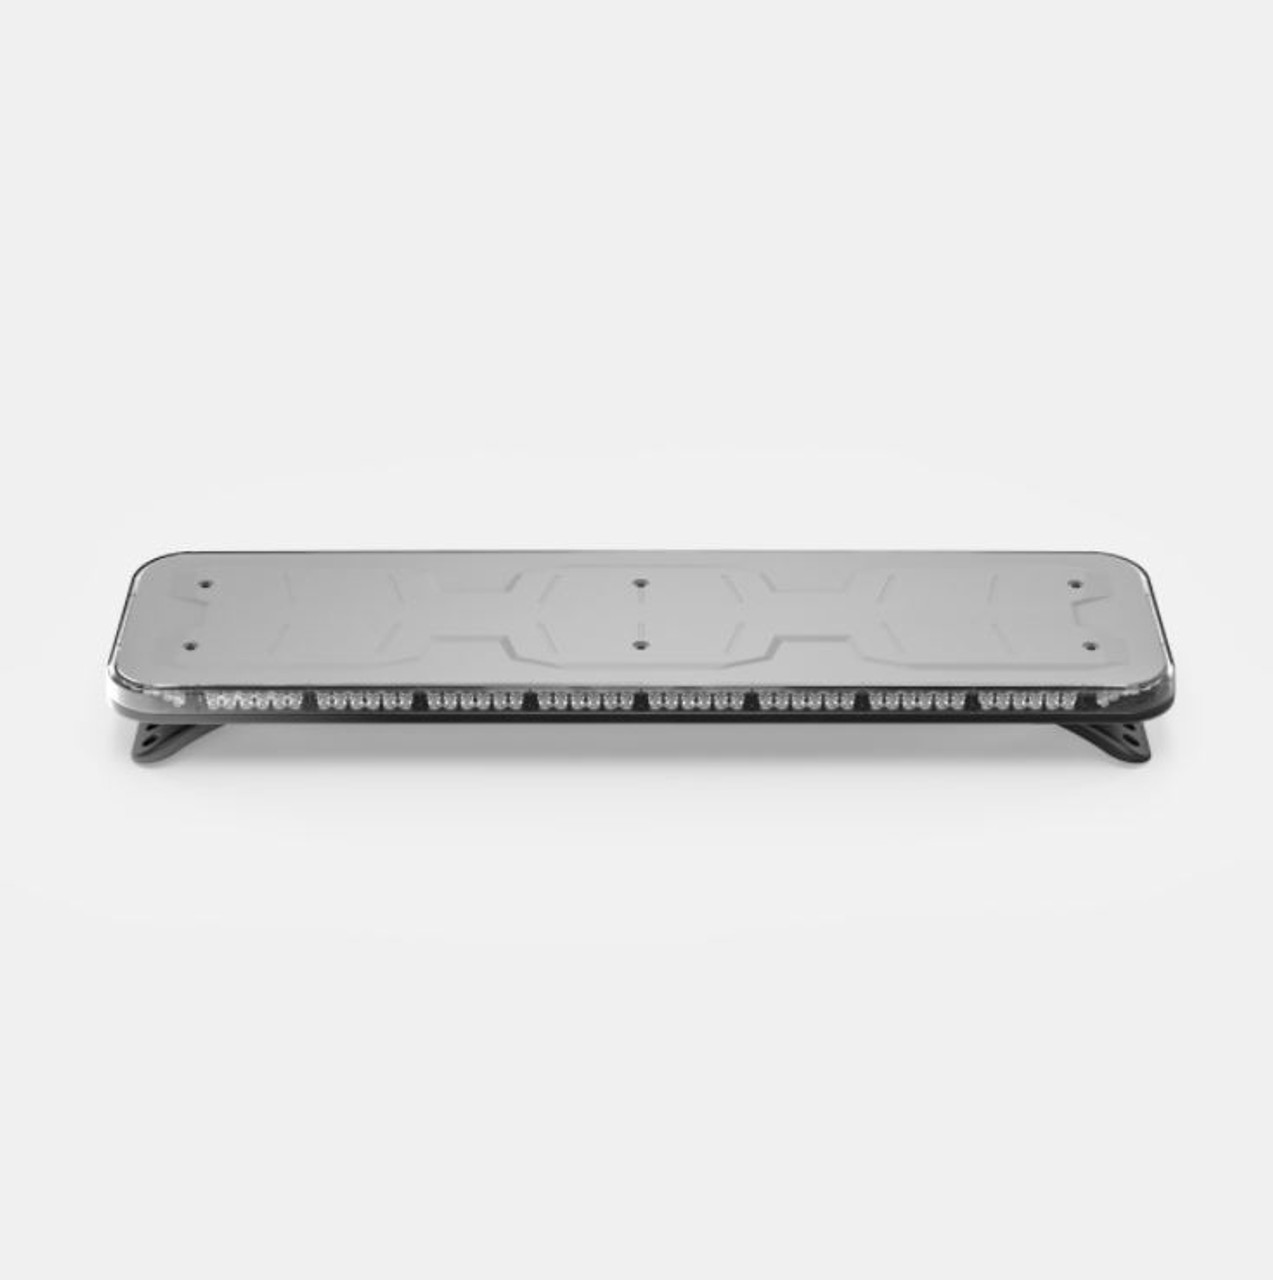 Feniex FN-4420-PERM Fusion GPL 44" LED Light Bar, Headache Rack or Permanent or Mounted Version. Alley and Takedown Lights Included. Includes Mounting Hardware